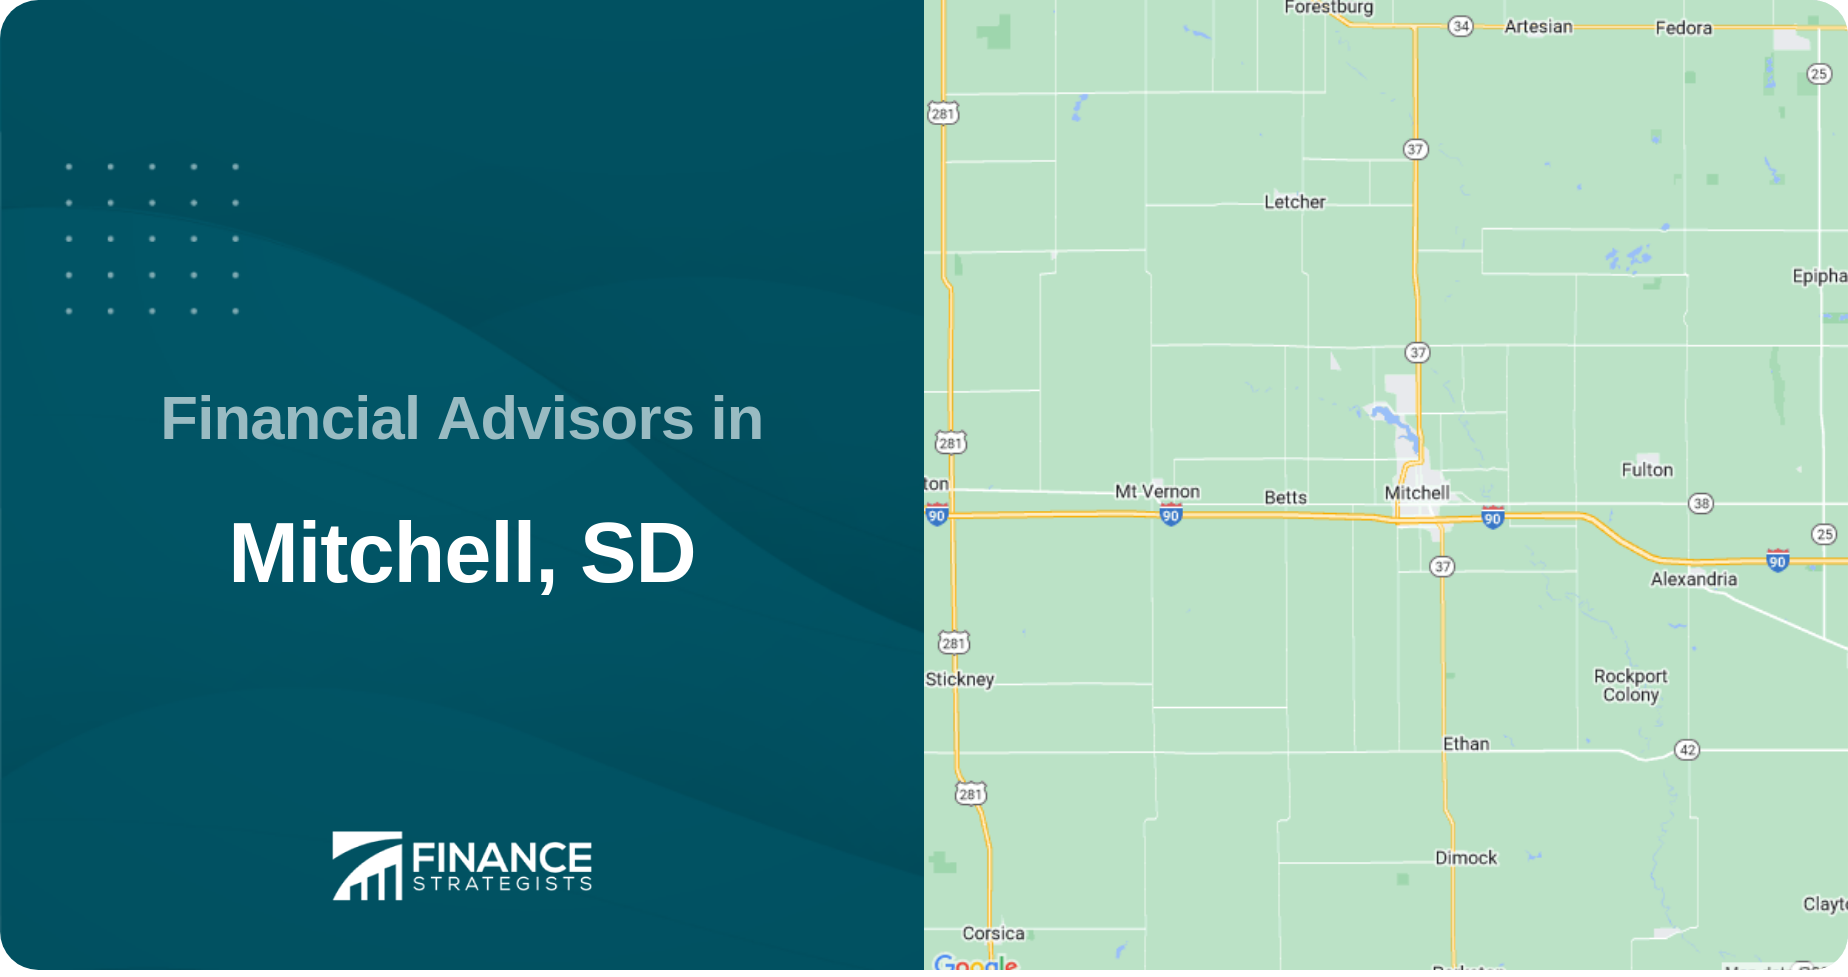 Financial Advisors in Mitchell, SD